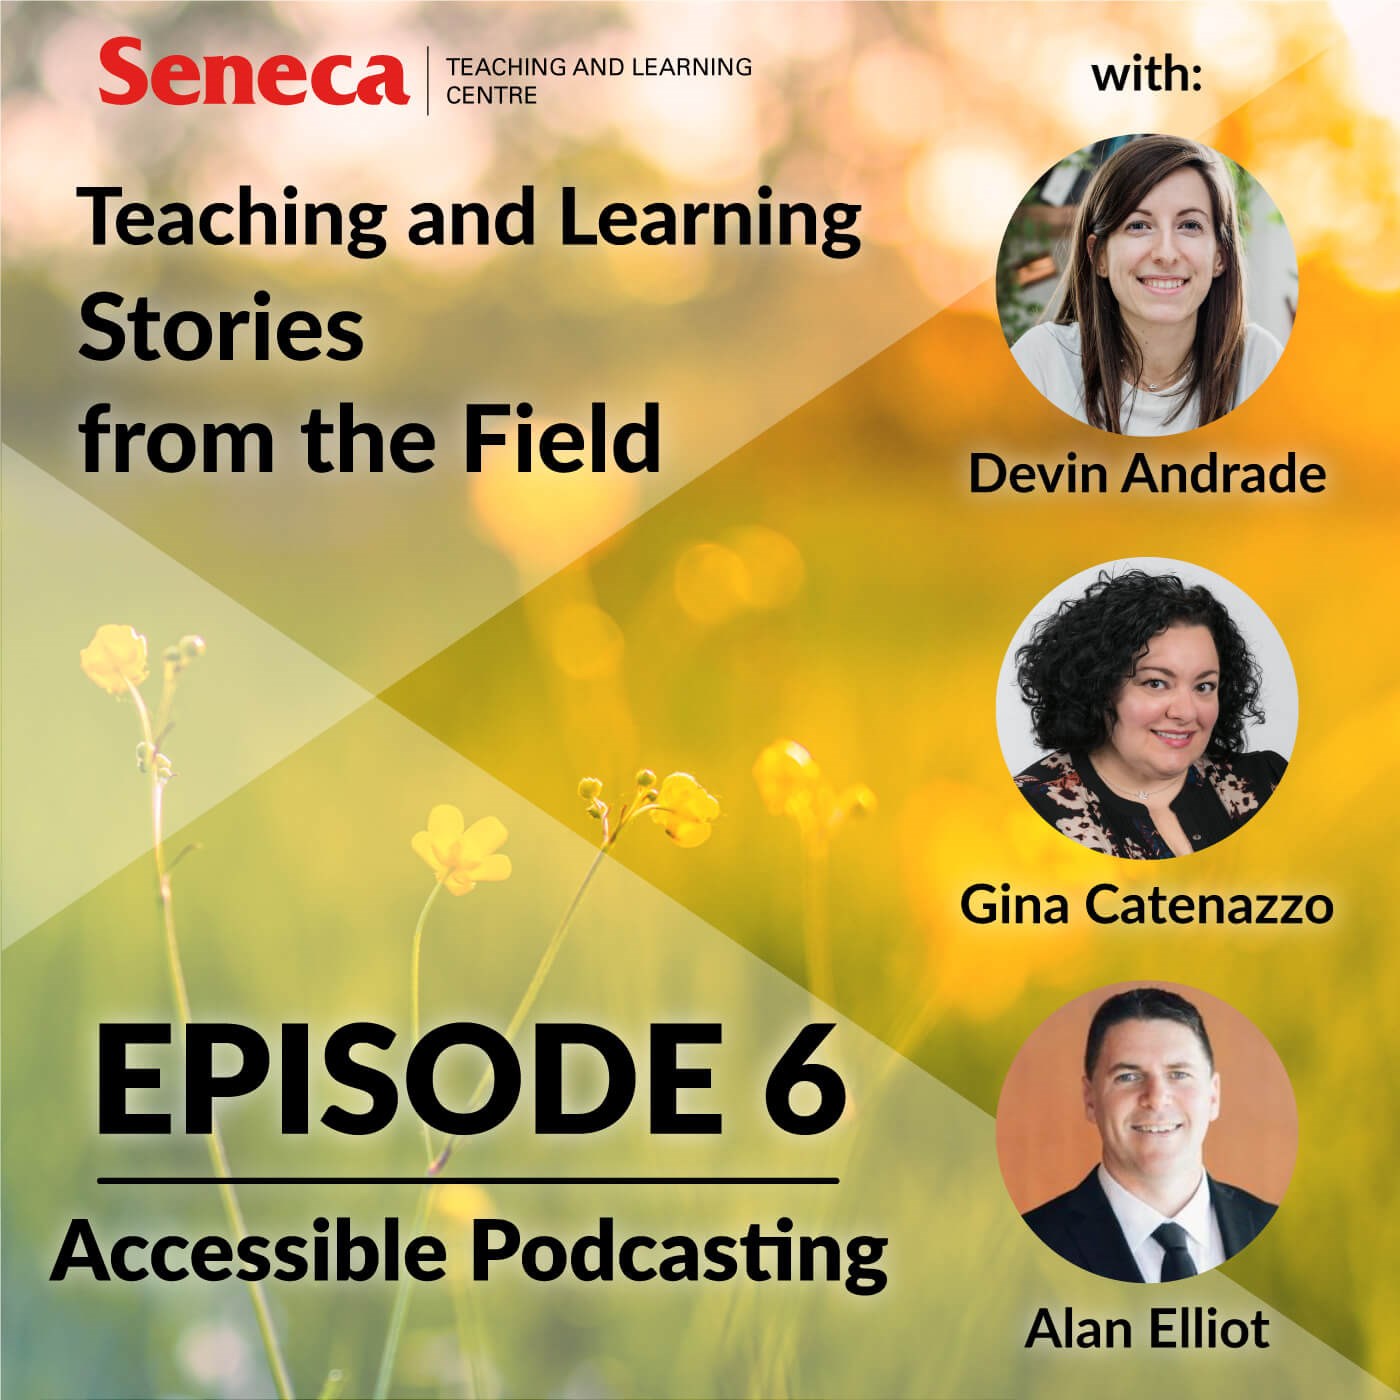 Episode 6 of the Teaching and Learning Stories podcast is called Accessible Podcasting with Gina Catenazzo, Devin Andrade, and Alan Elliot